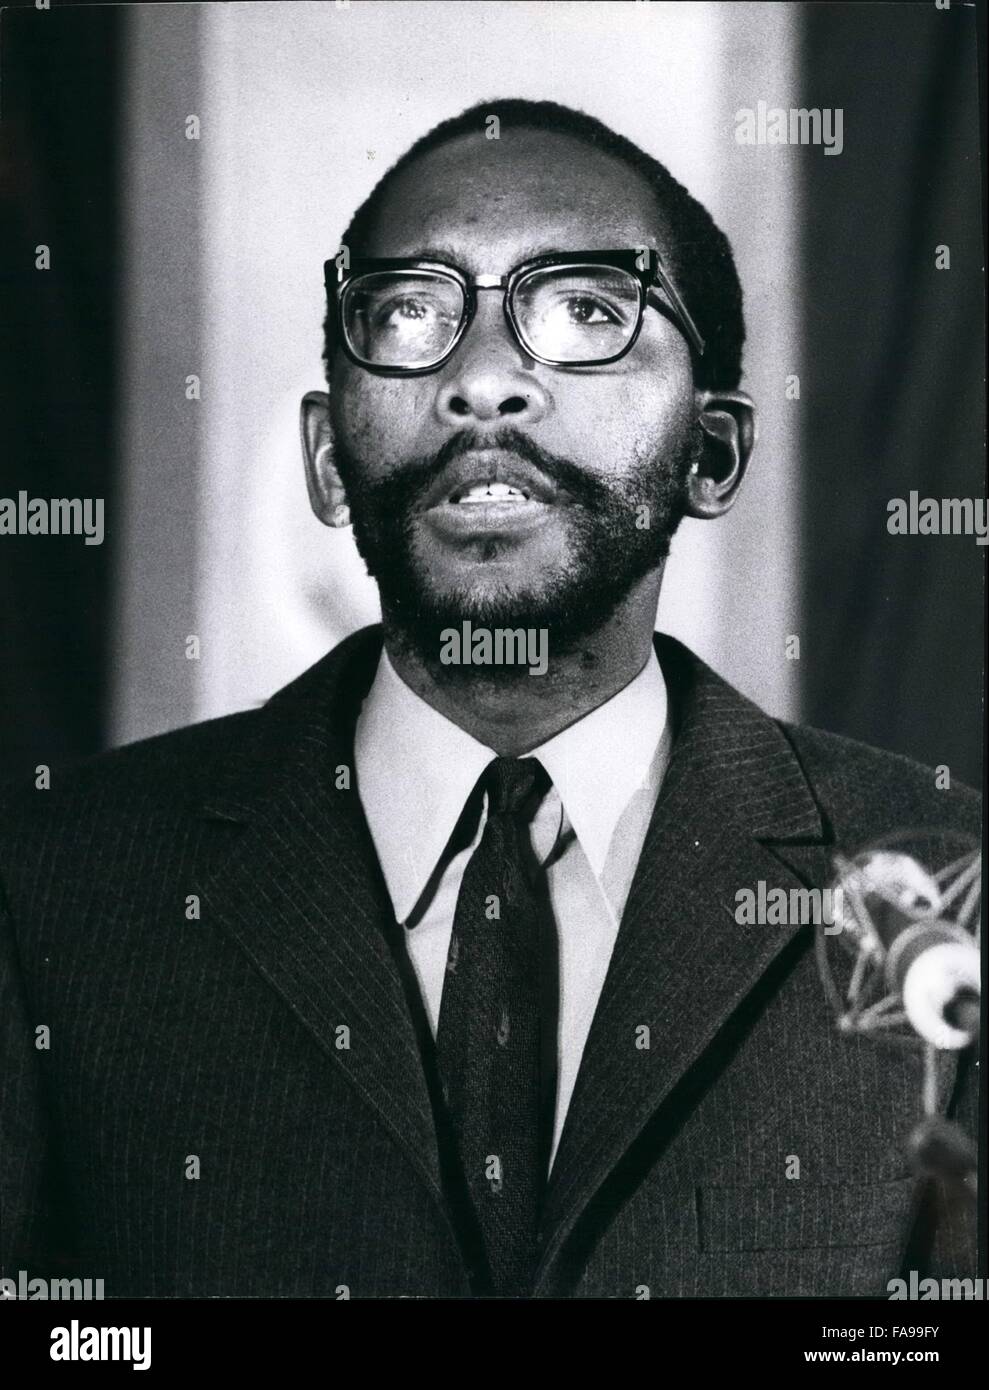 1967 - Constantine Bereng Seeiso, King Moshoeshoe II of Lesotho. Born 1938. Educated Lesotho, Ampleforth, England and Oxford. Paramount Chief, 1960. King 1966. Married to Princess Tabitha Masentle Heir apparent: Prince Lesie David, born 1963 © Keystone Pictures USA/ZUMAPRESS.com/Alamy Live News Stock Photo